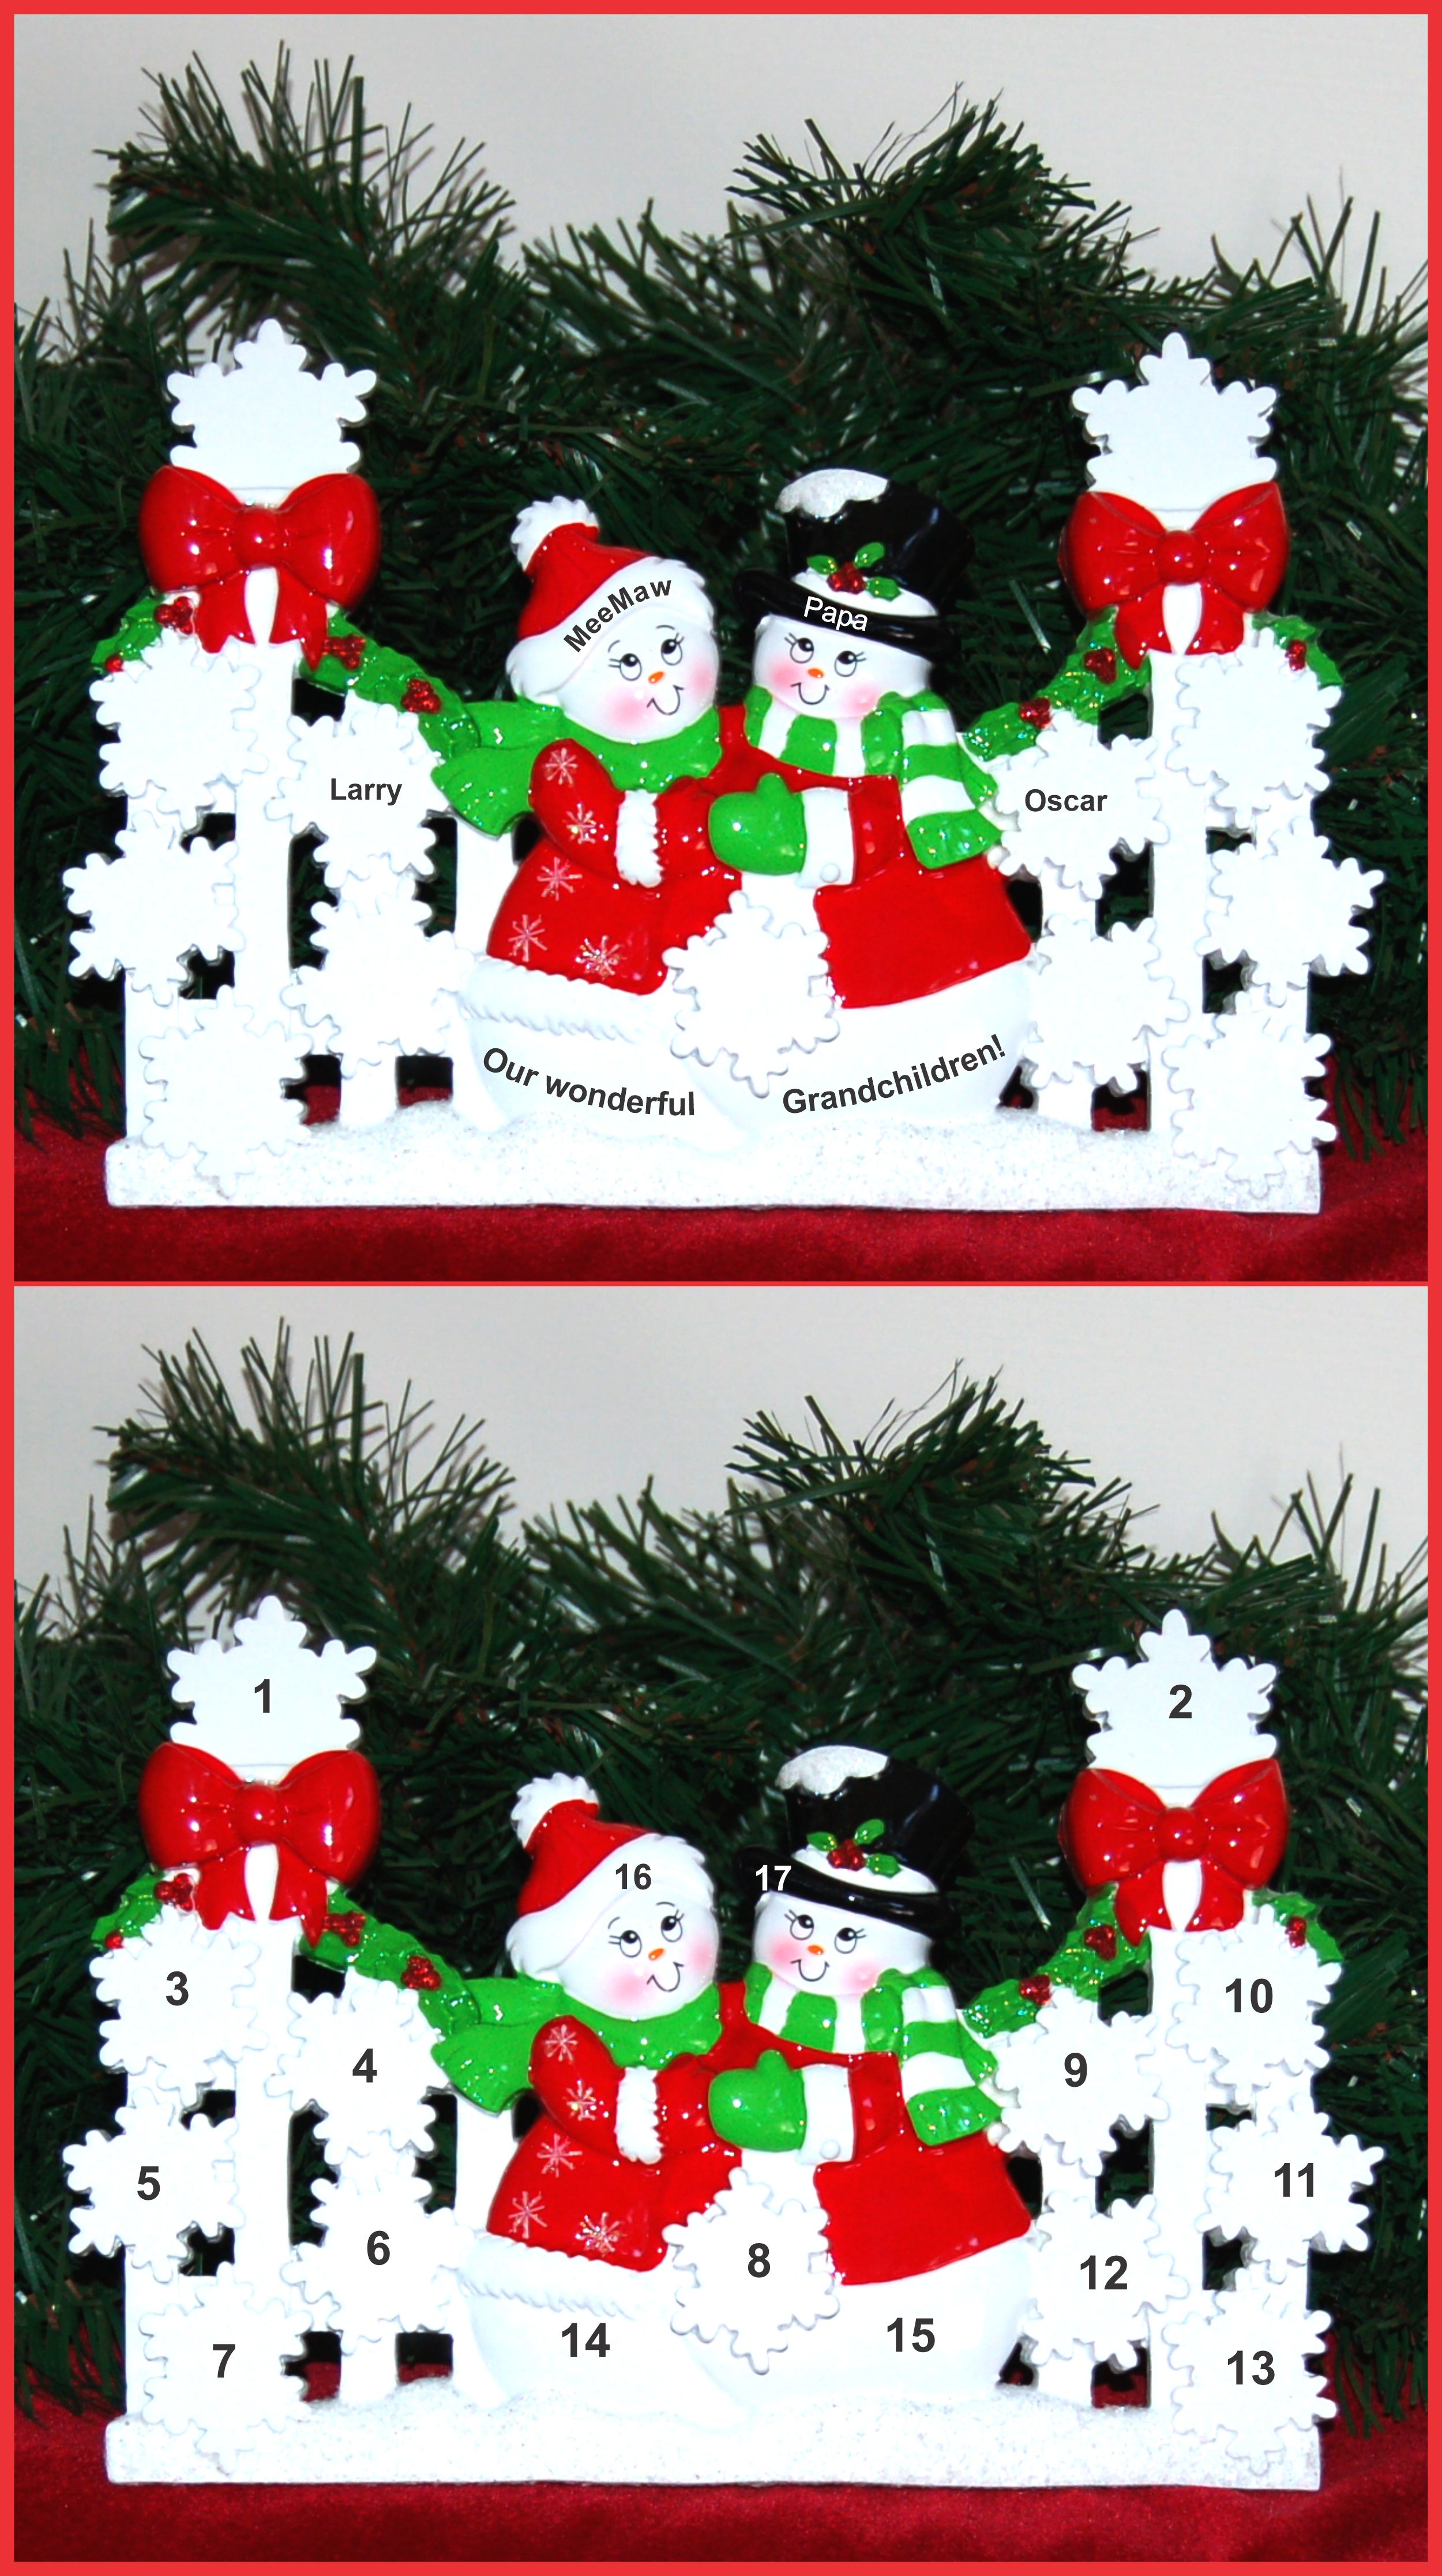 Personalized Grandparents Tabletop Christmas Decoration Snowflakes for 2 Grandchildren by Russell Rhodes